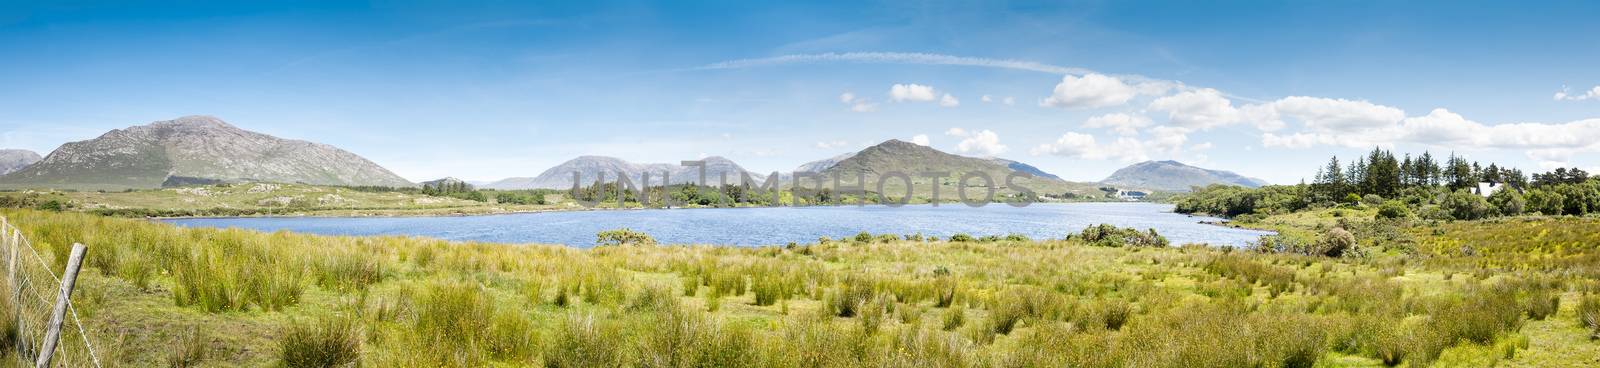 A panoramic image of the Lough Corrib in Ireland